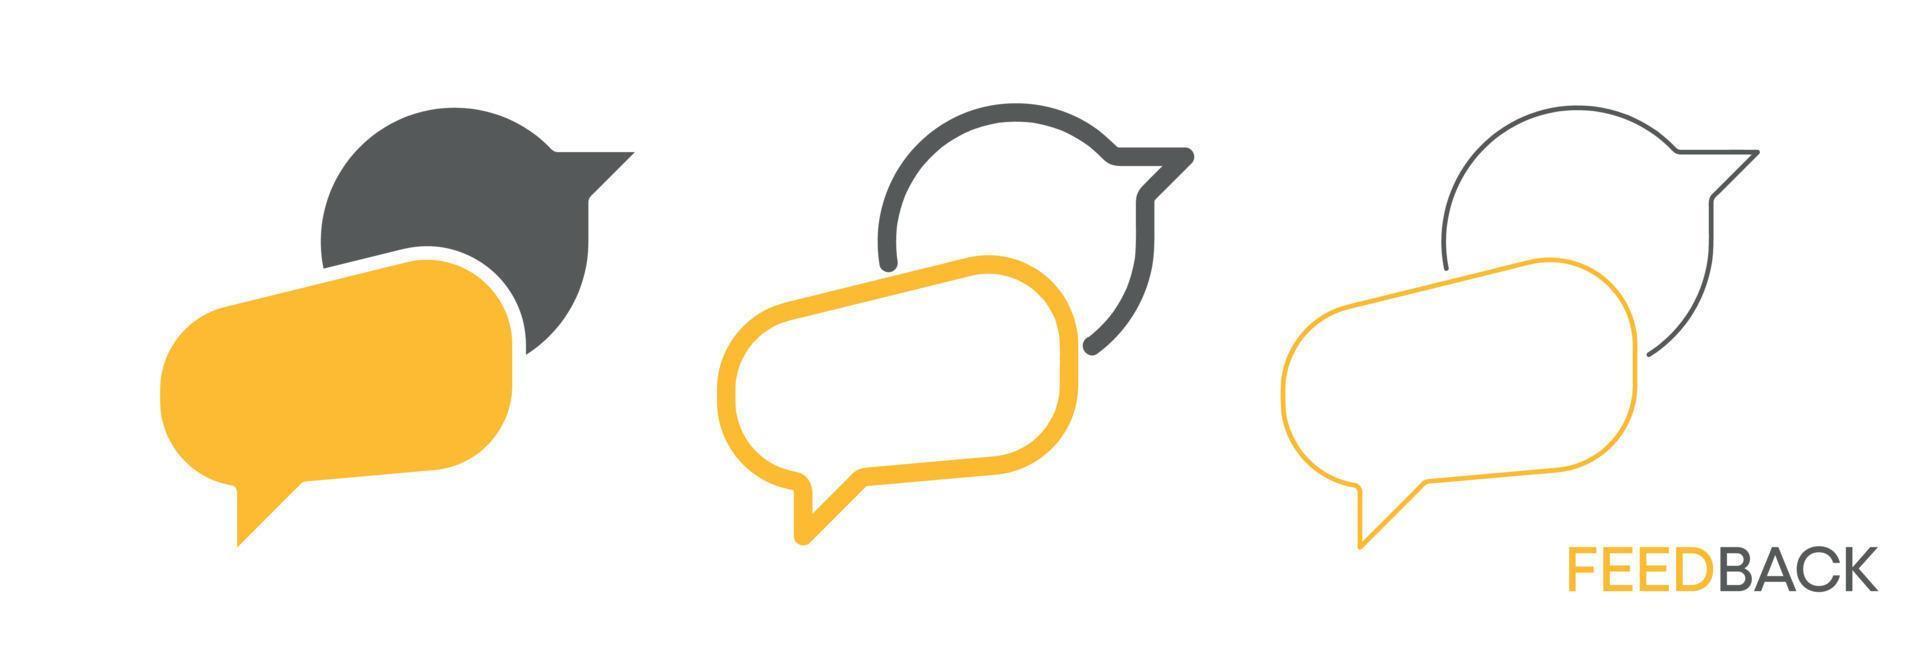 Speech bubble icon symbol on a white background. vector